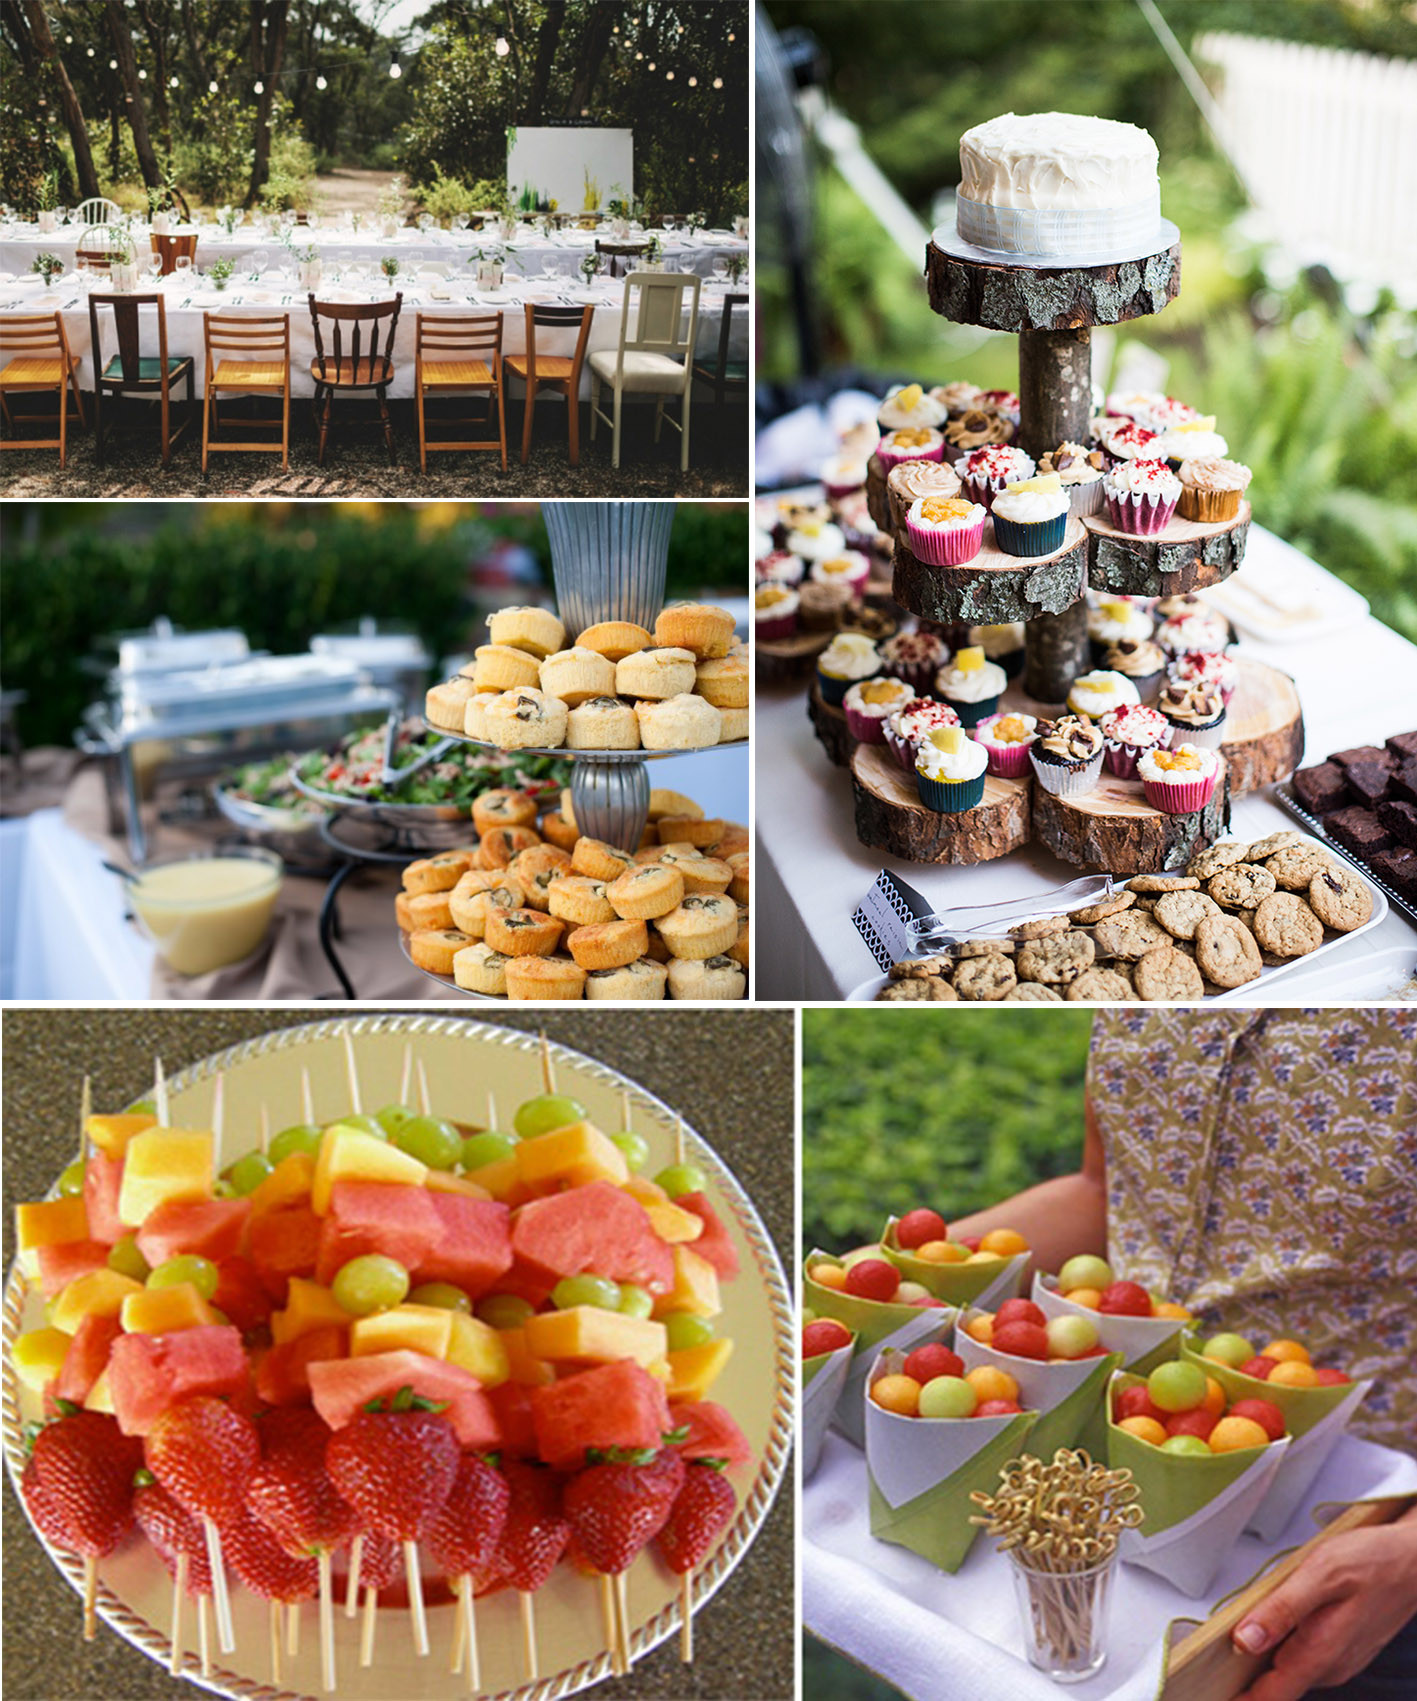 Food Ideas For Outdoor Party
 How to play a backyard themed wedding – lianggeyuan123